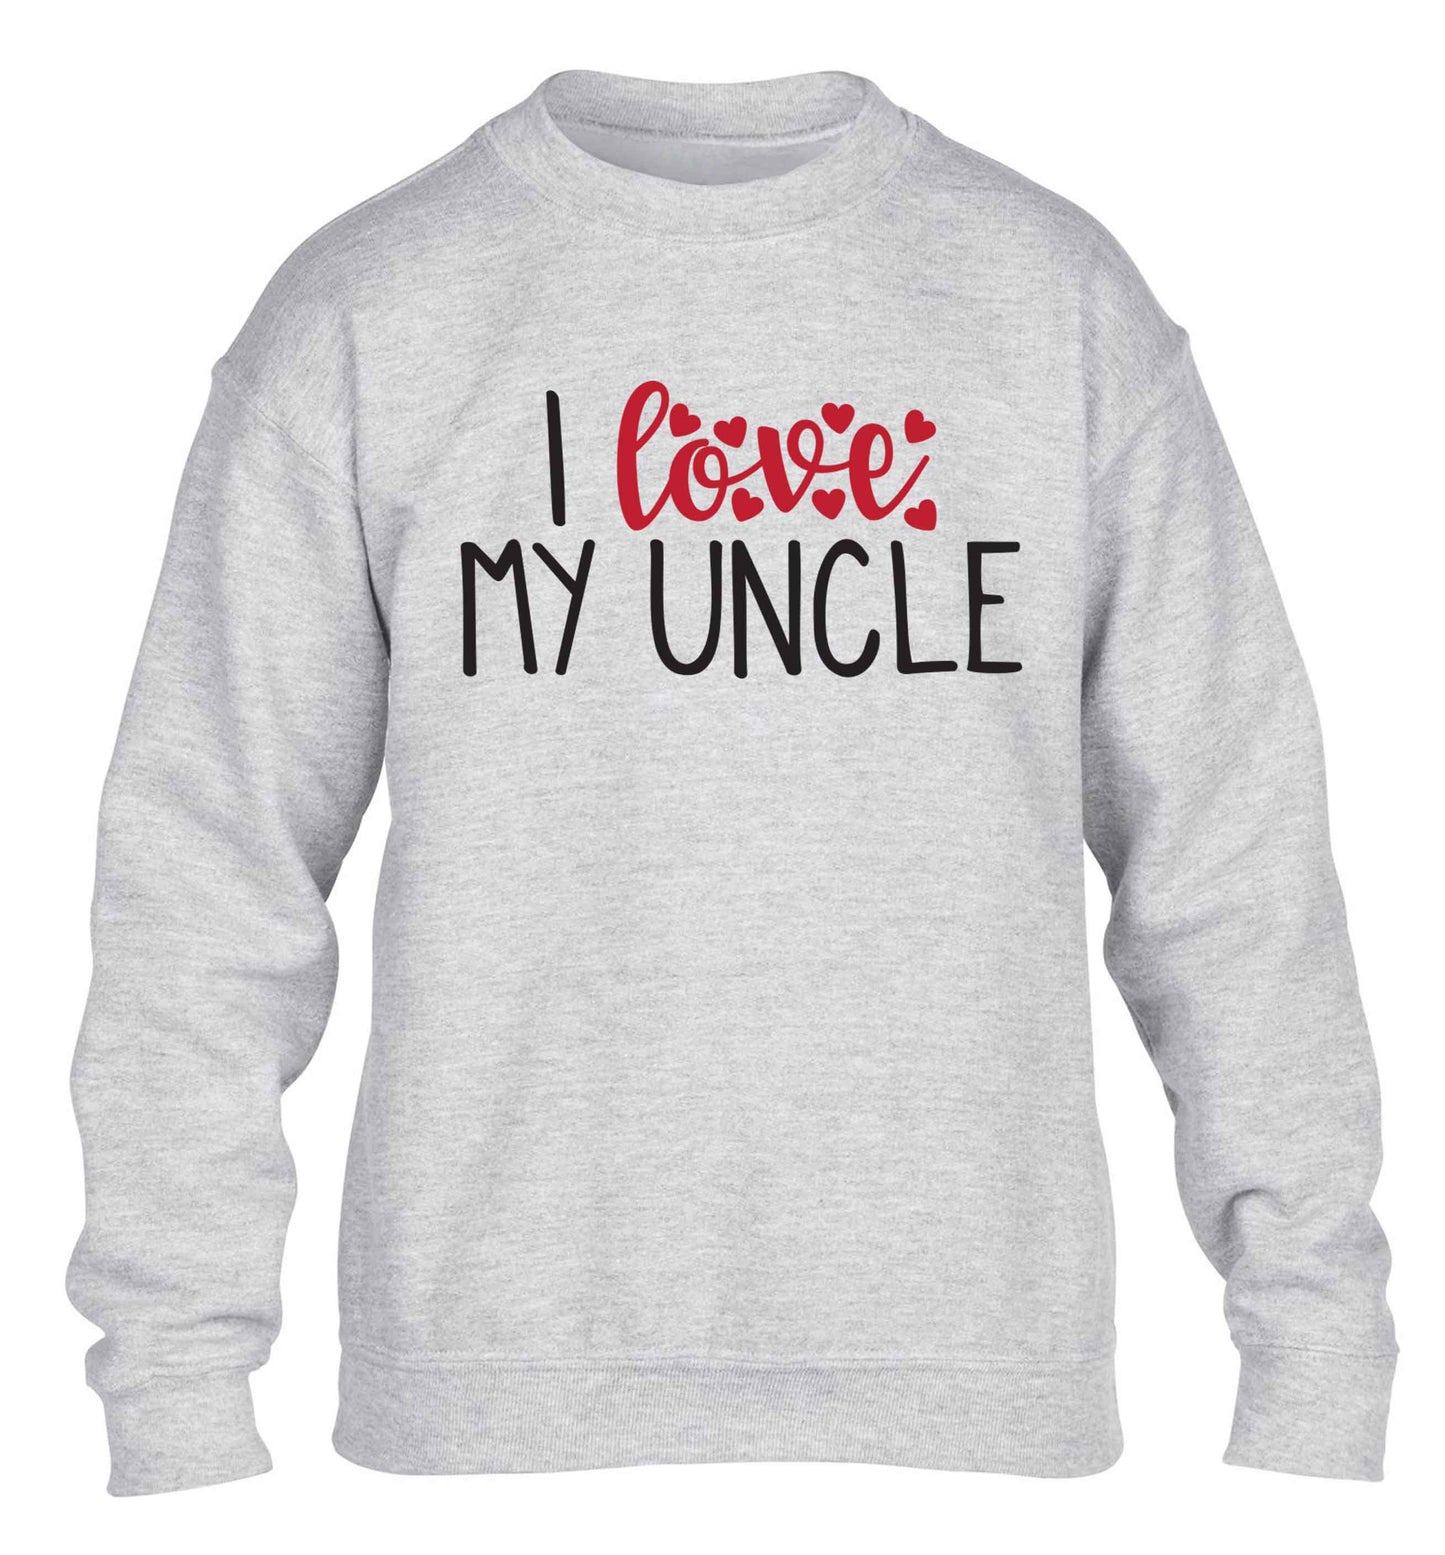 I love my uncle children's grey sweater 12-13 Years